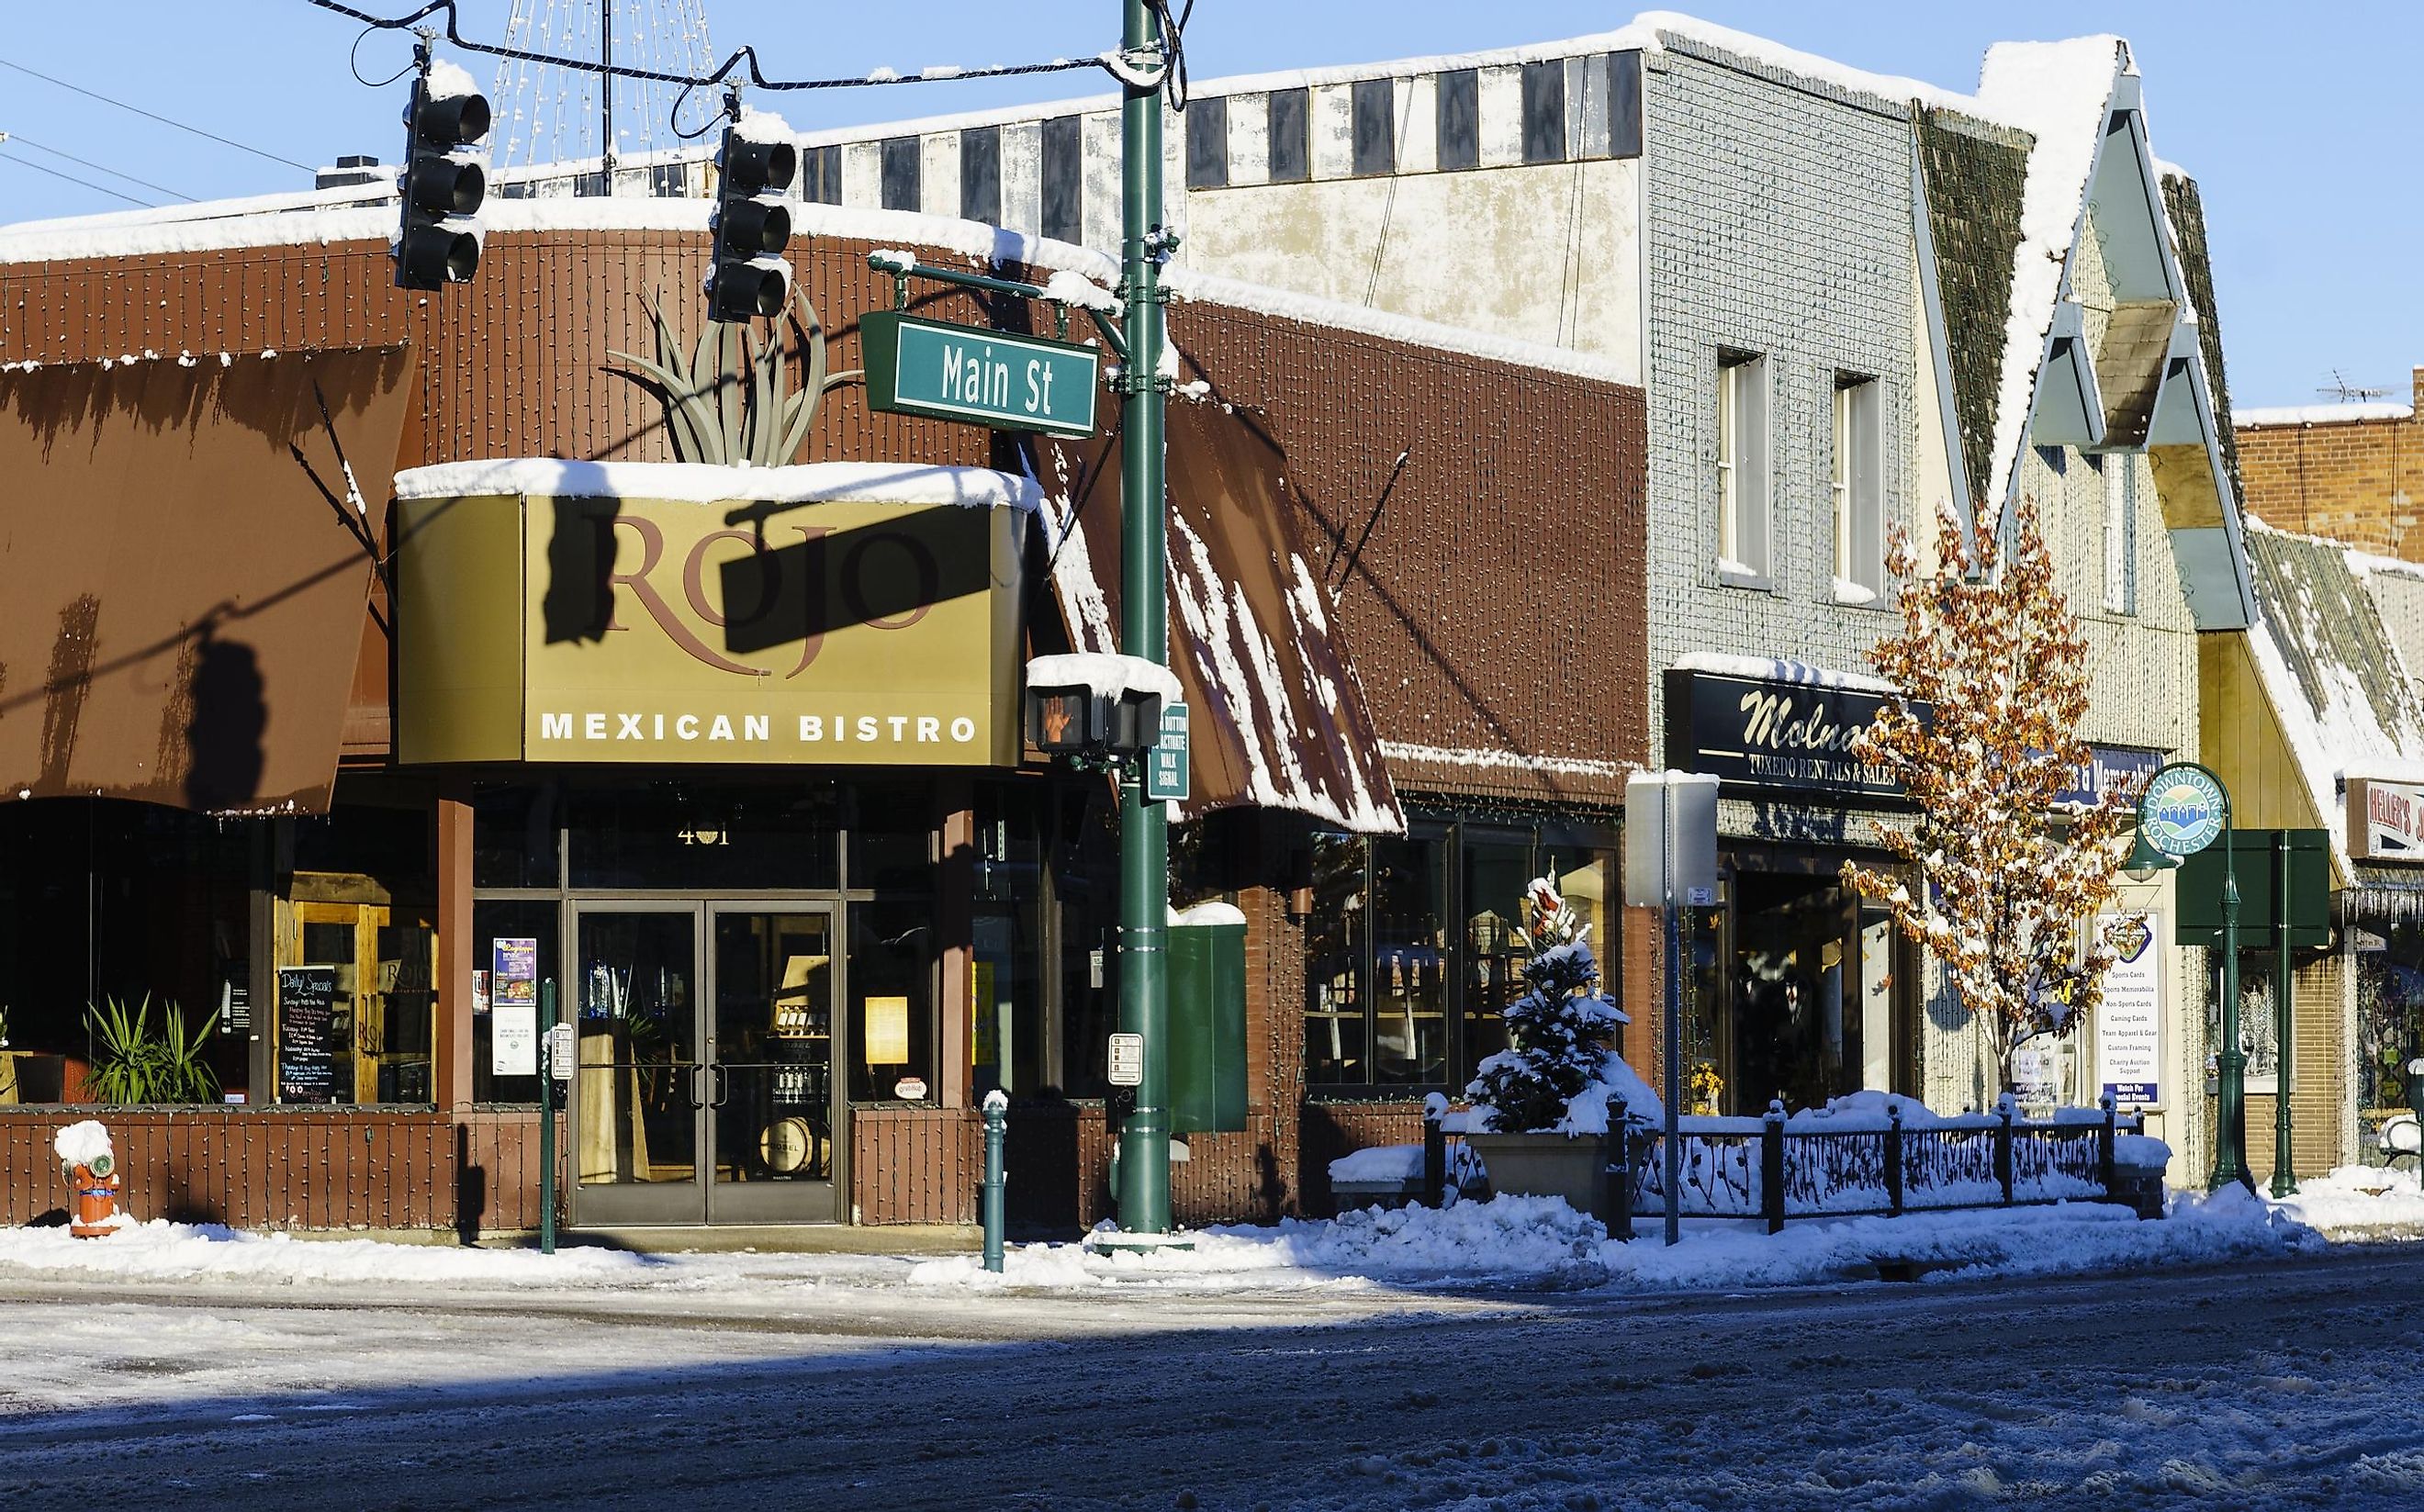 The quaint downtown area of Rochester, Michigan